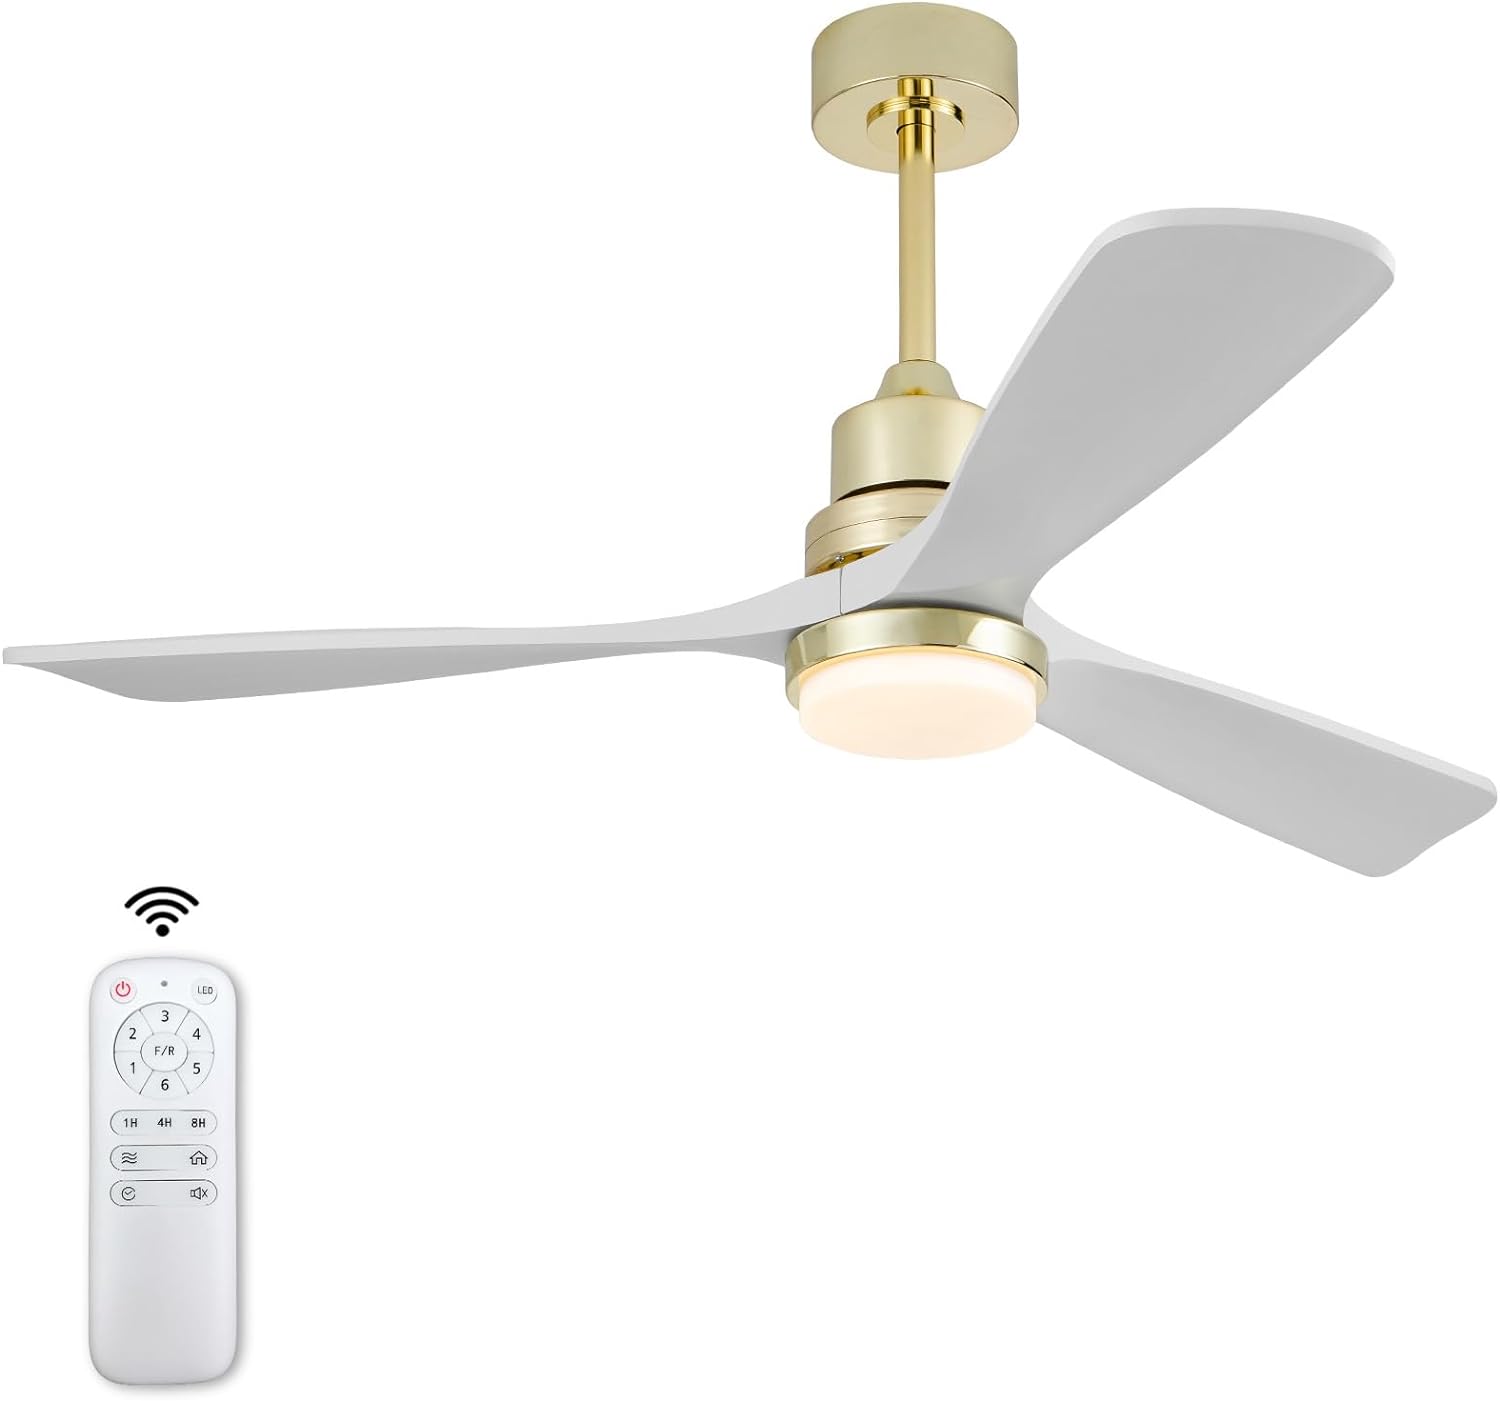 BOJUE 52 inch Gold Ceiling Fans with Lights and White Solid Wood Fan Blades - Modern Ceiling Fan with Remote for Indoor/Outdoor Farmhouse, Low Profile Bedroom, Patio - Gold Finish and White Blades